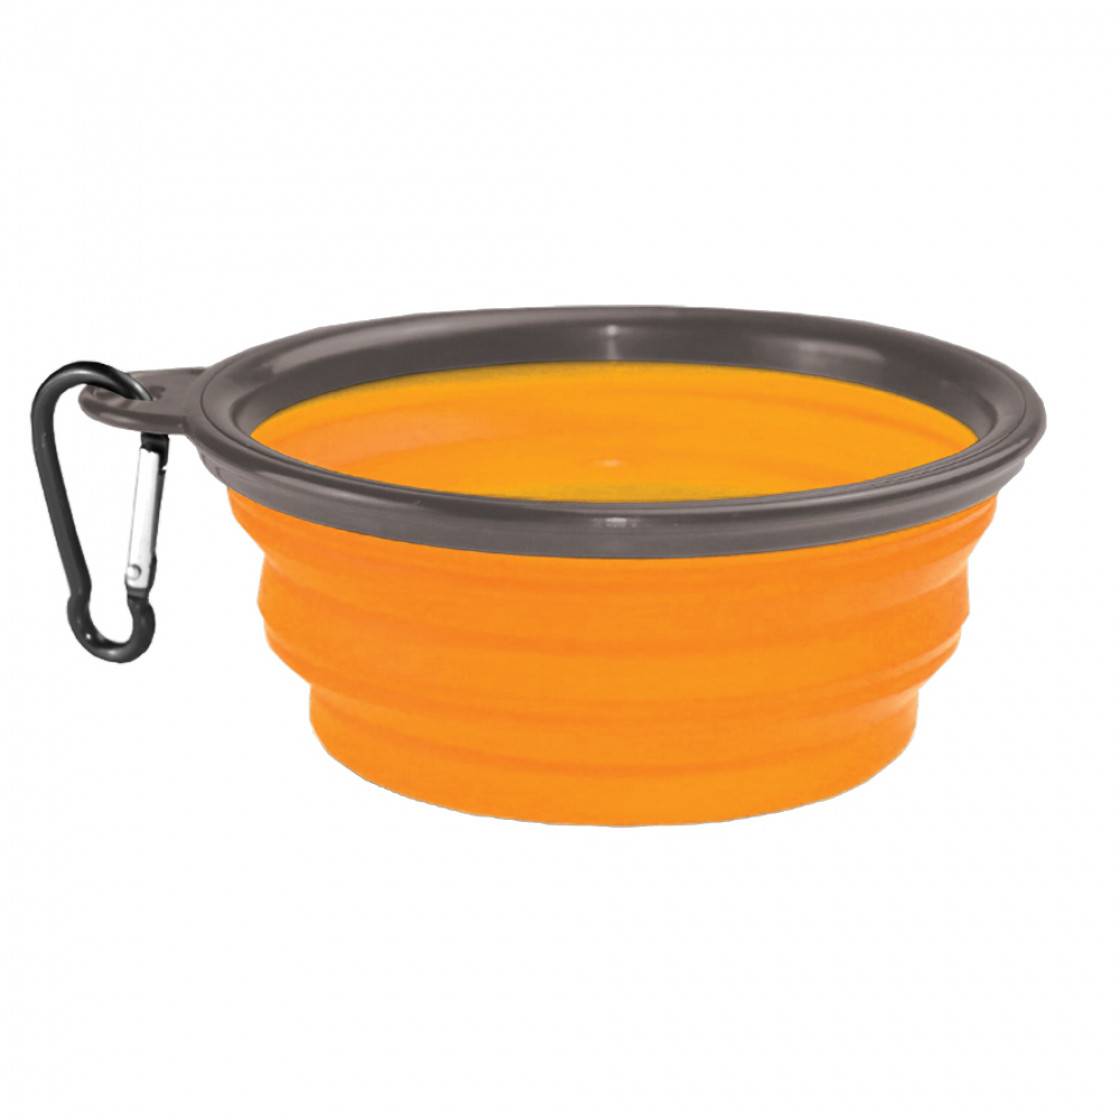 Kuma Outdoor Gear Qualifies for Free Shipping Kuma Outdoor Gear Collapsible Silicone Bowl 1L Orange/Gray #KM-CSB-OG